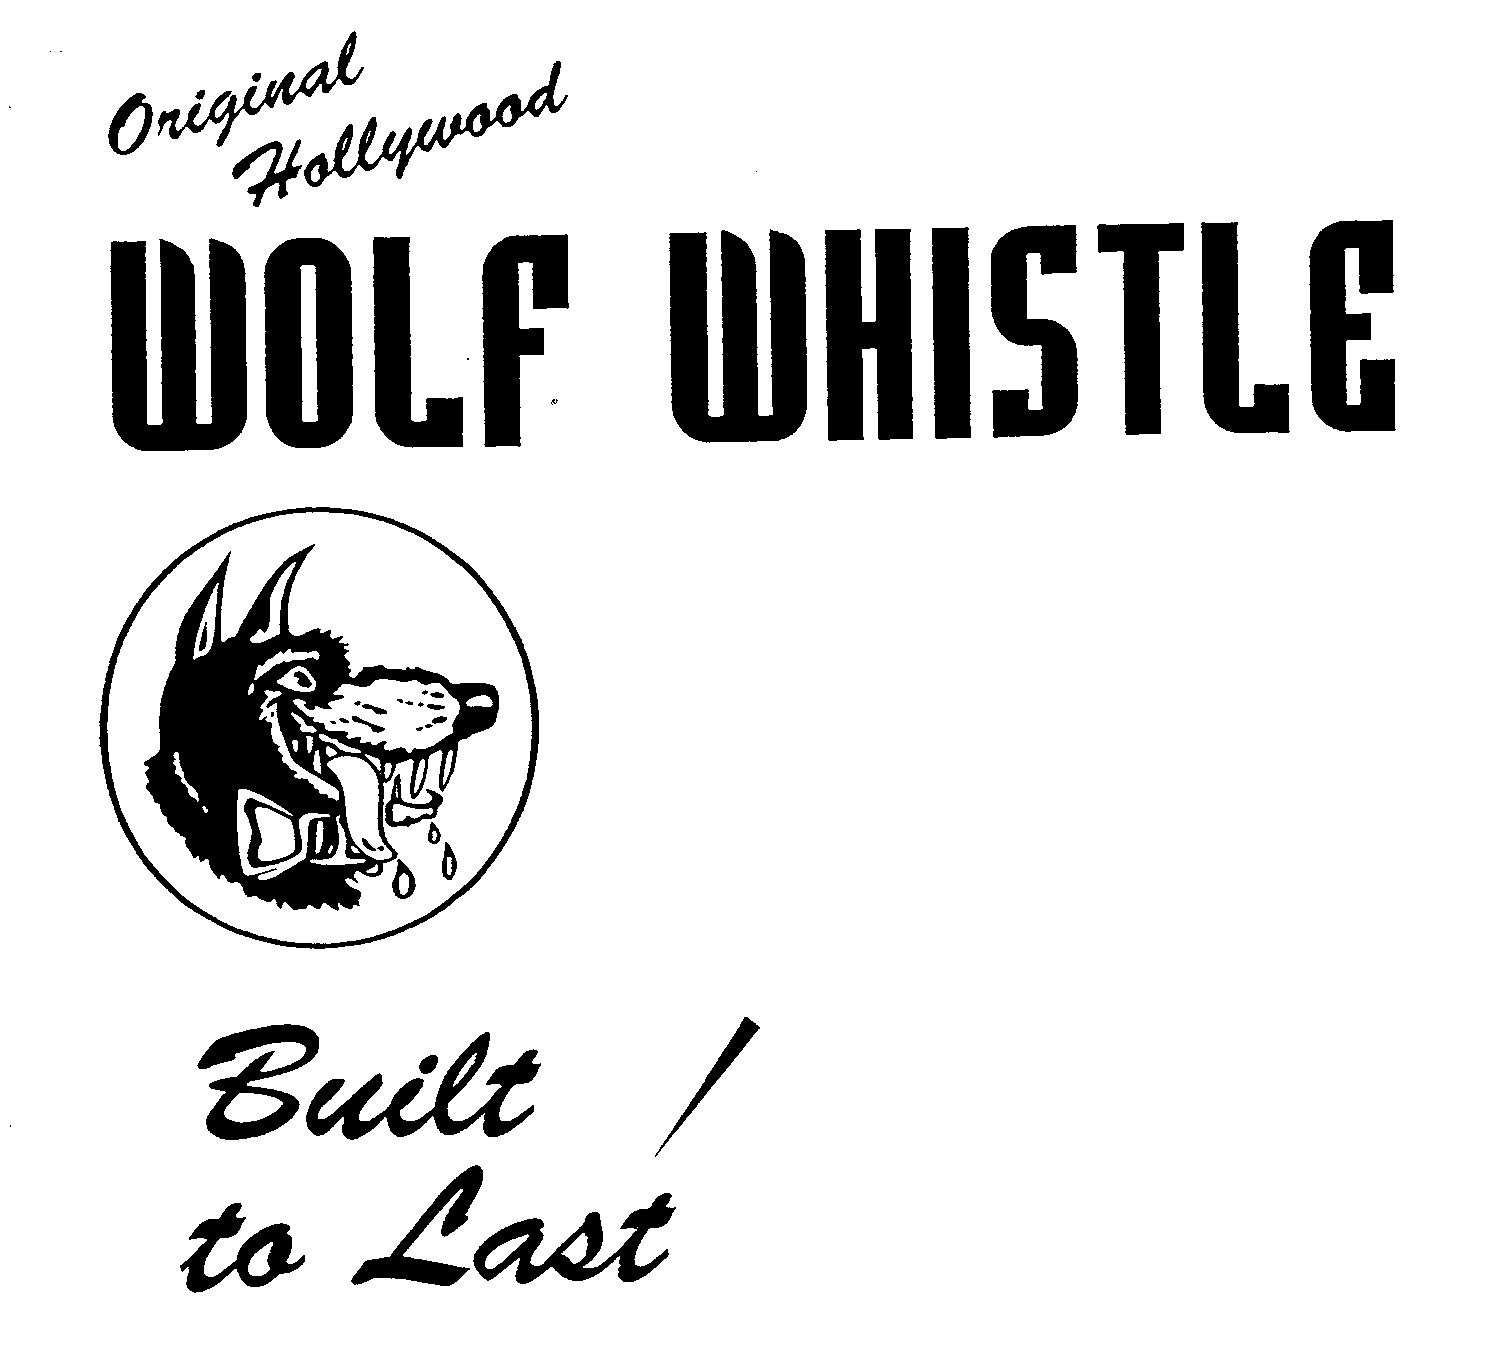  ORIGINAL HOLLYWOOD WOLF WHISTLE BUILT TO LAST